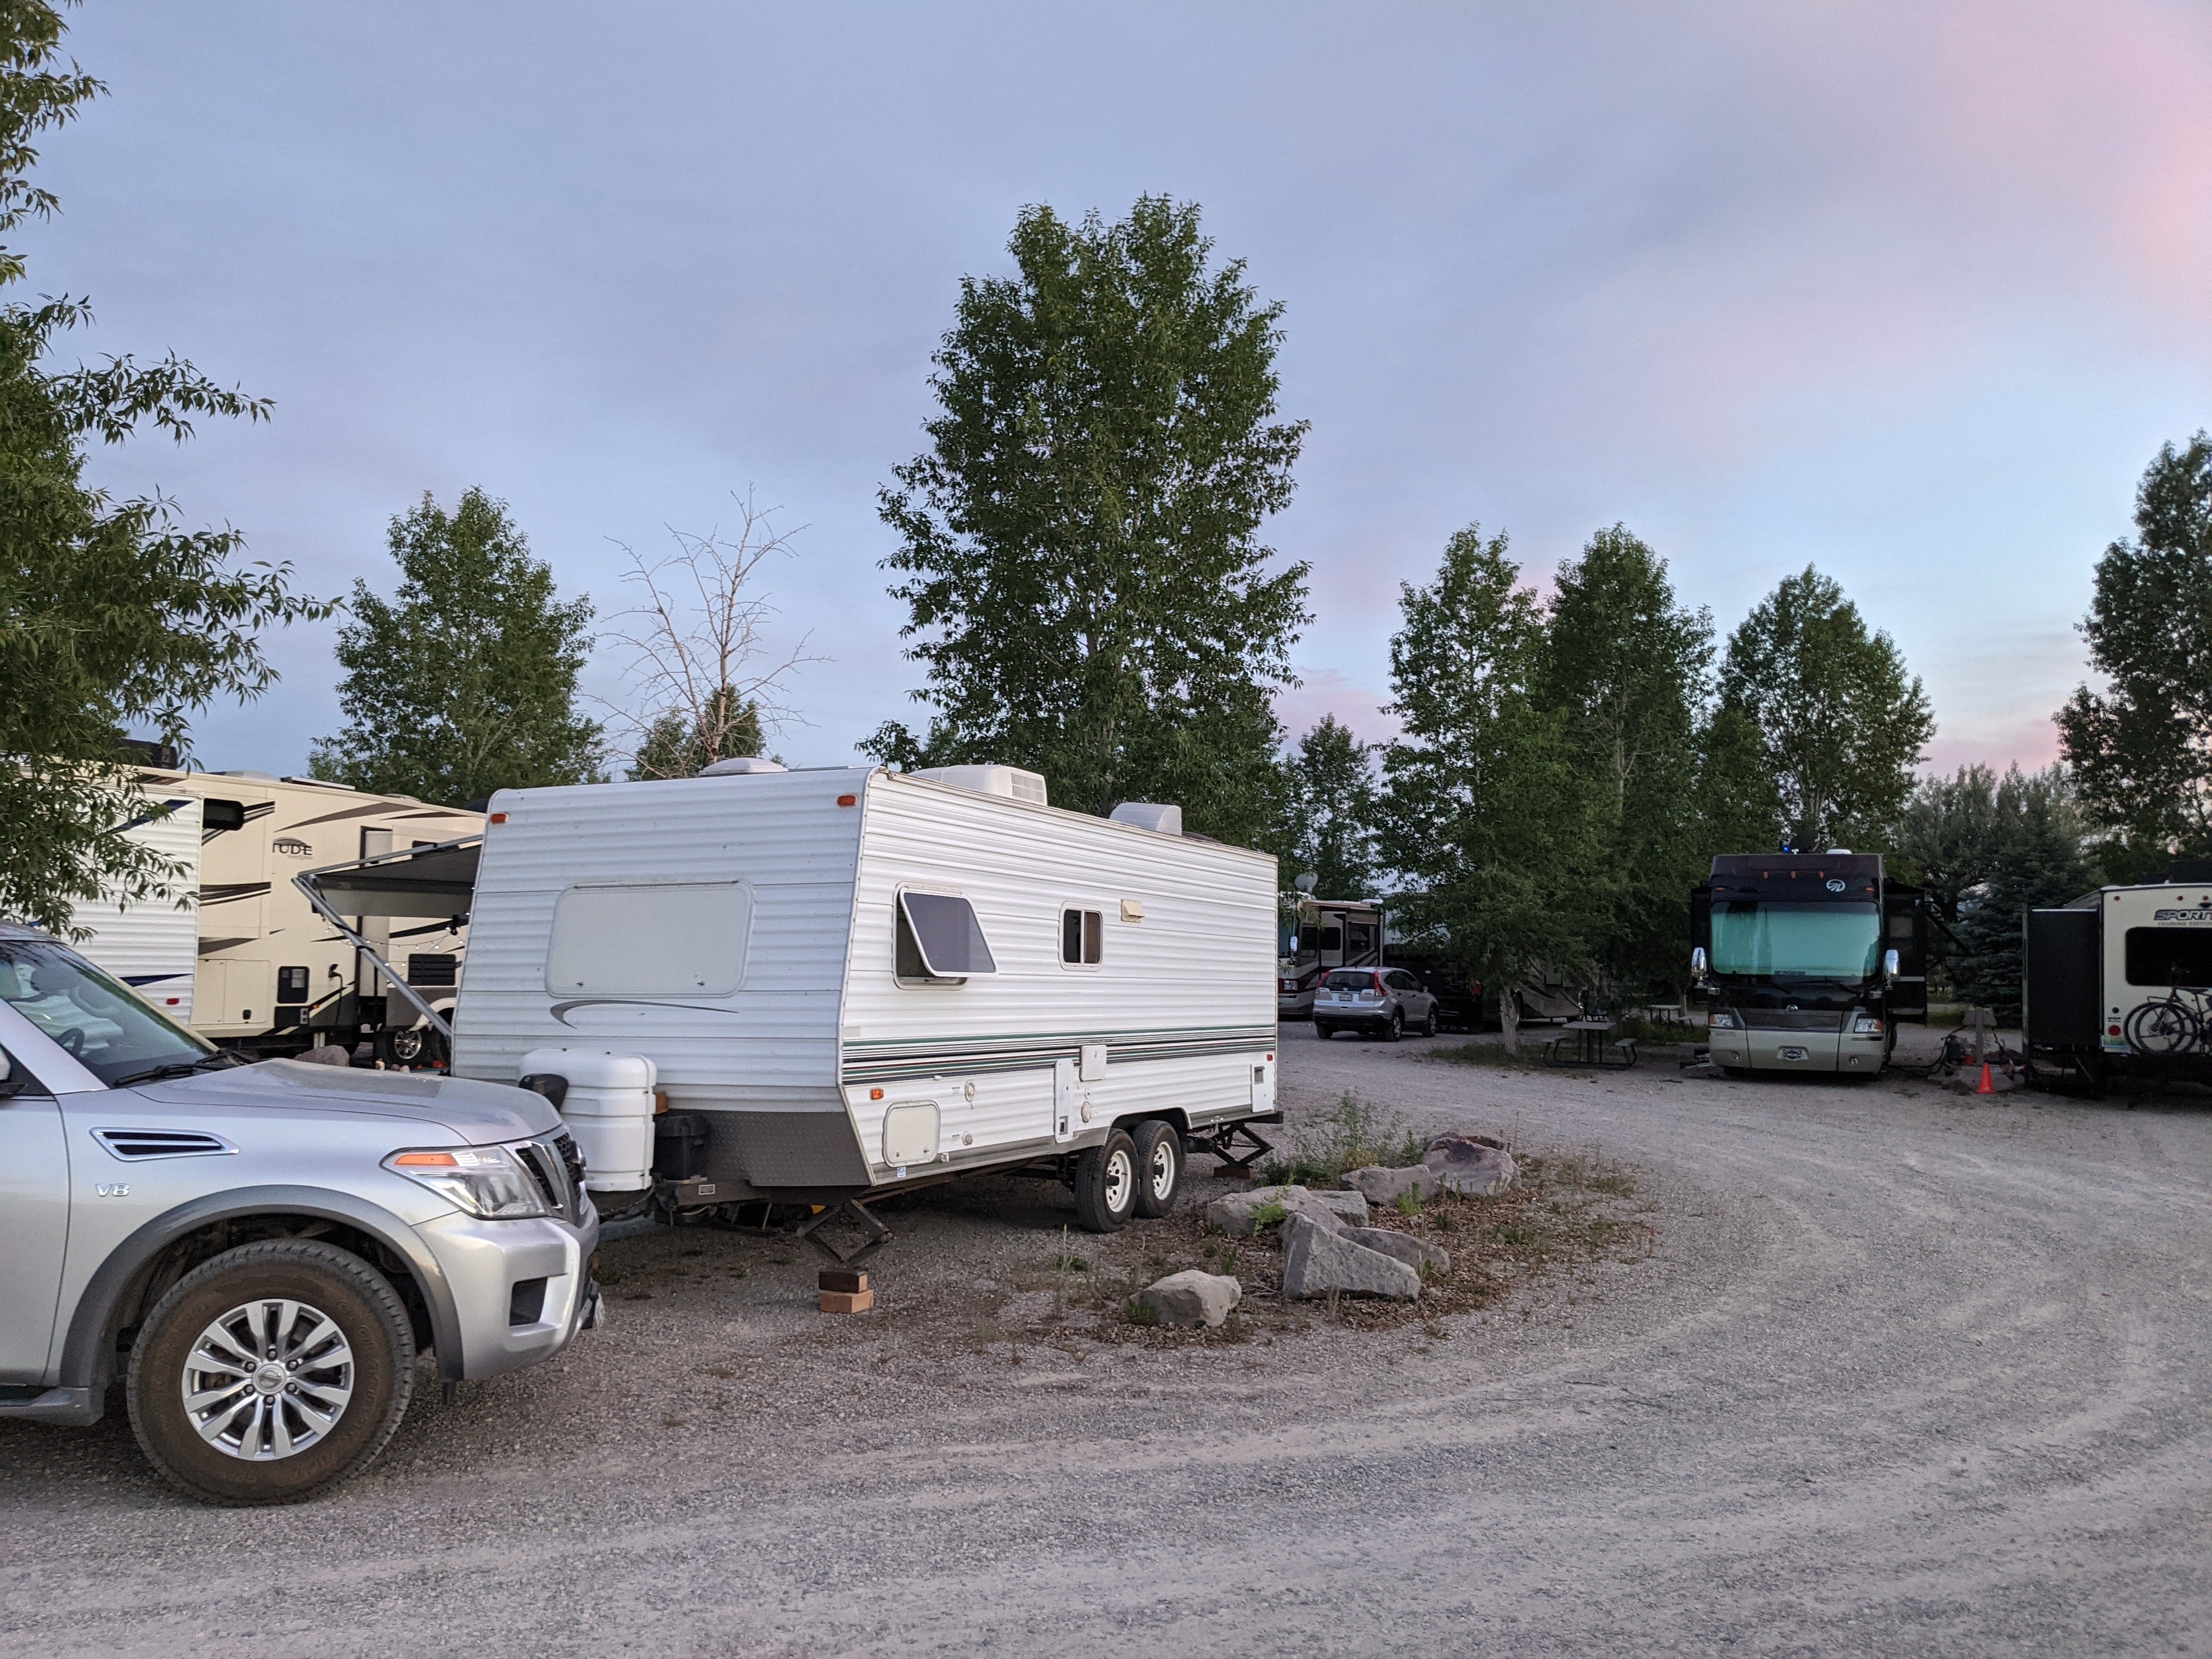 Camper submitted image from Teton Peaks Lodge & RV Park - 5